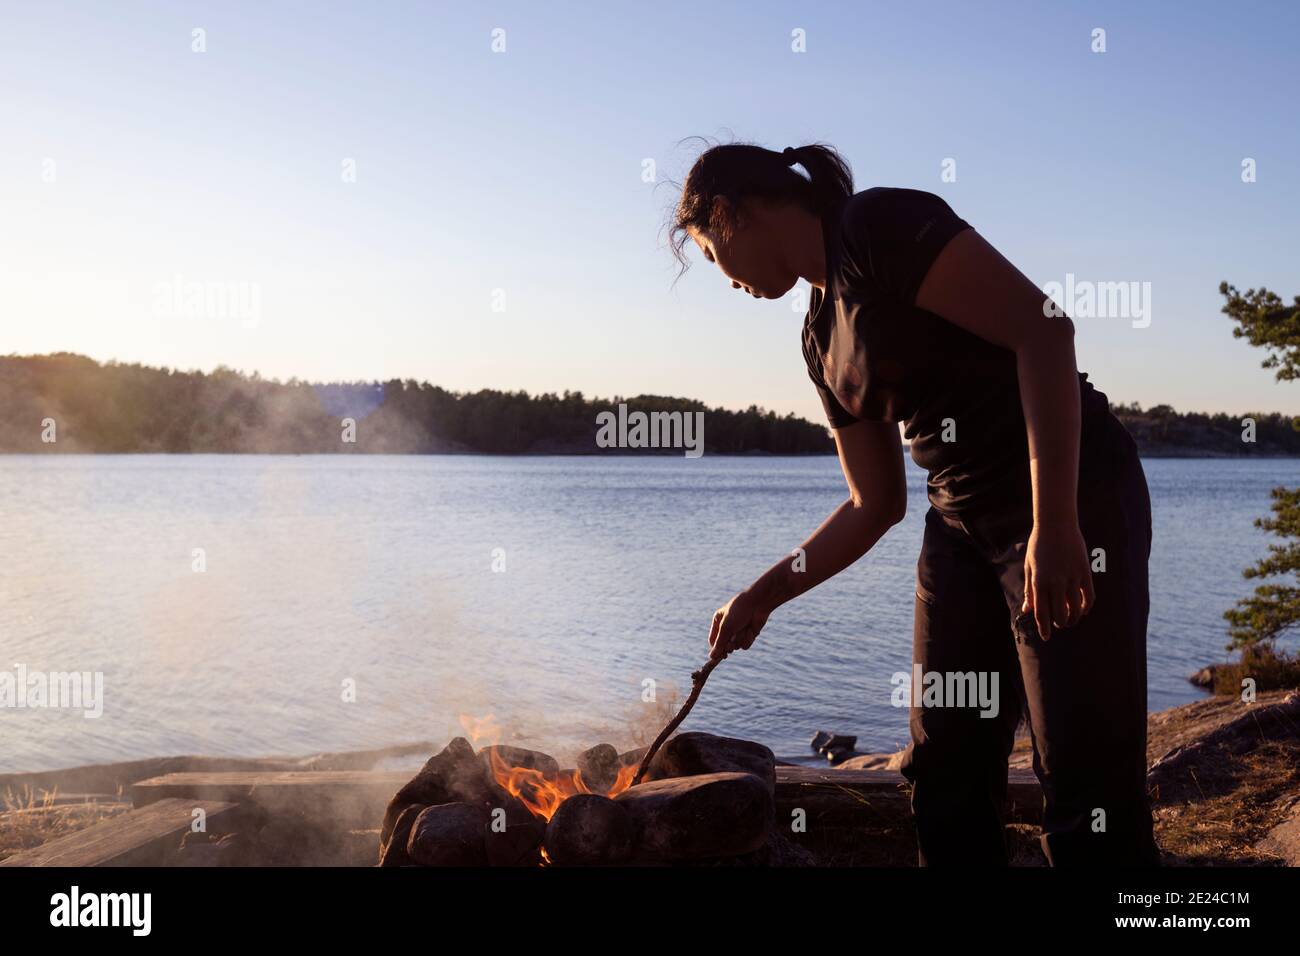 Woman at camp fire, lake on background Stock Photo